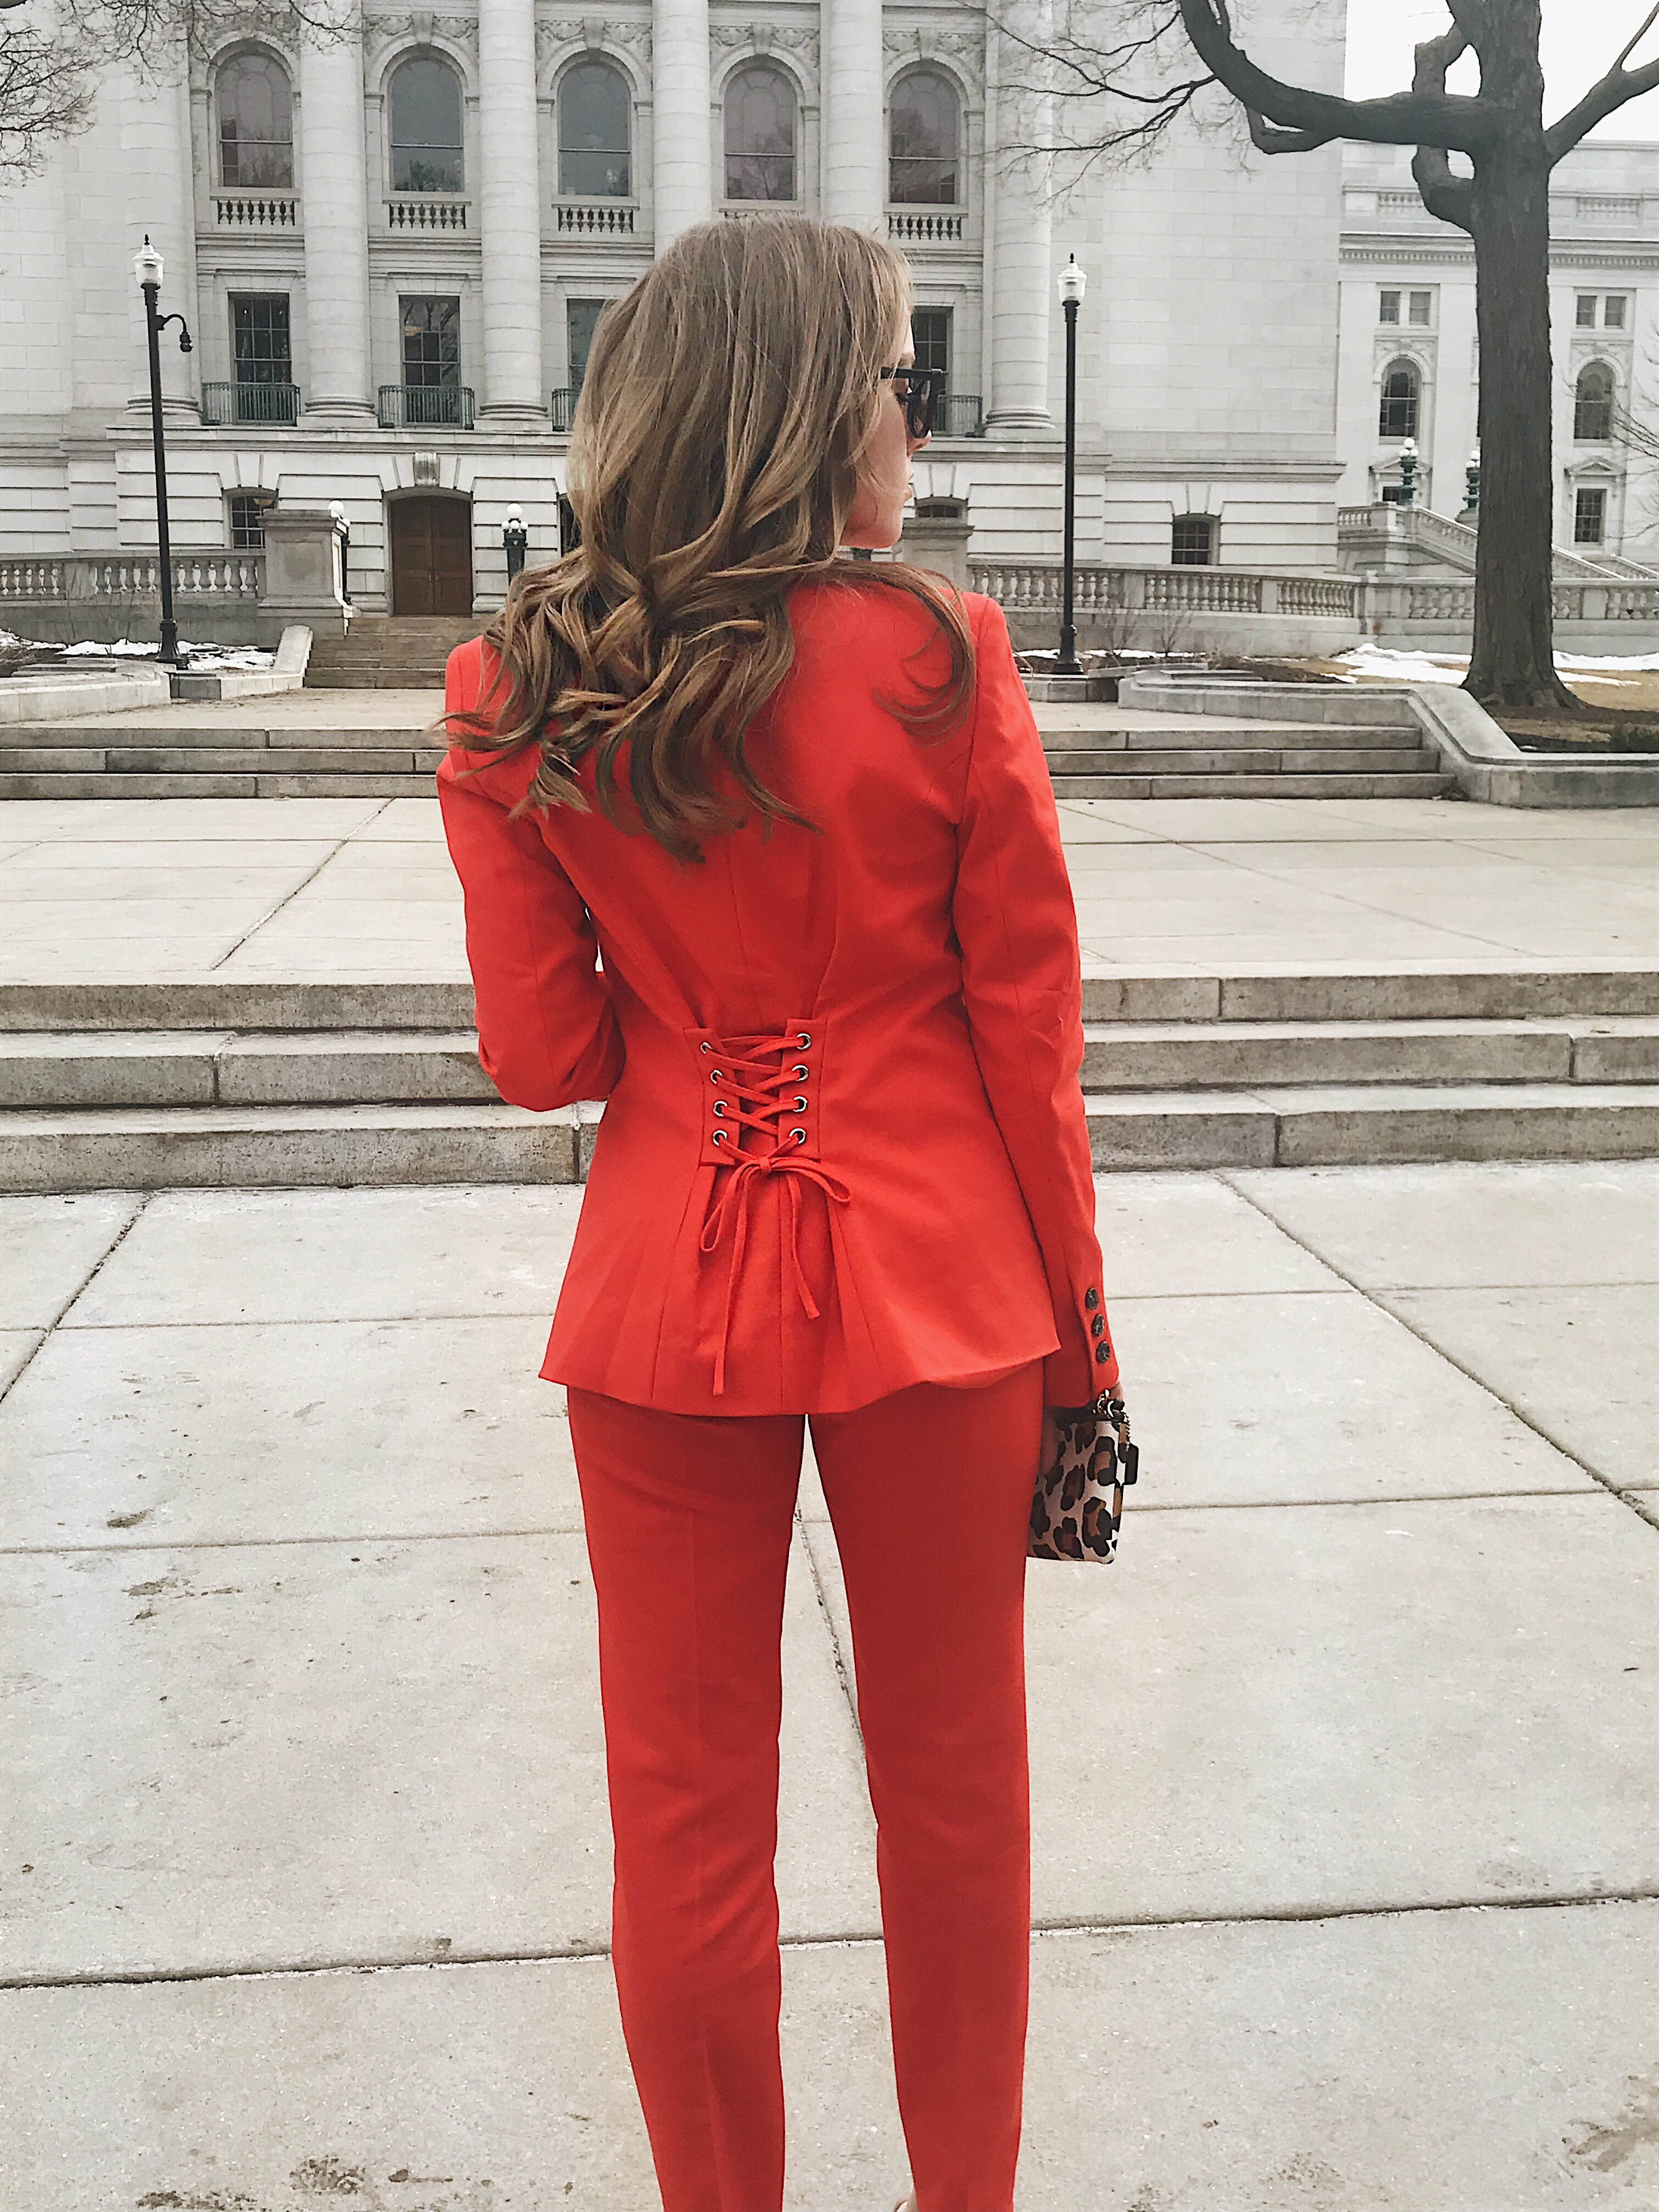 Red Power Suit for the UW Fashion Show